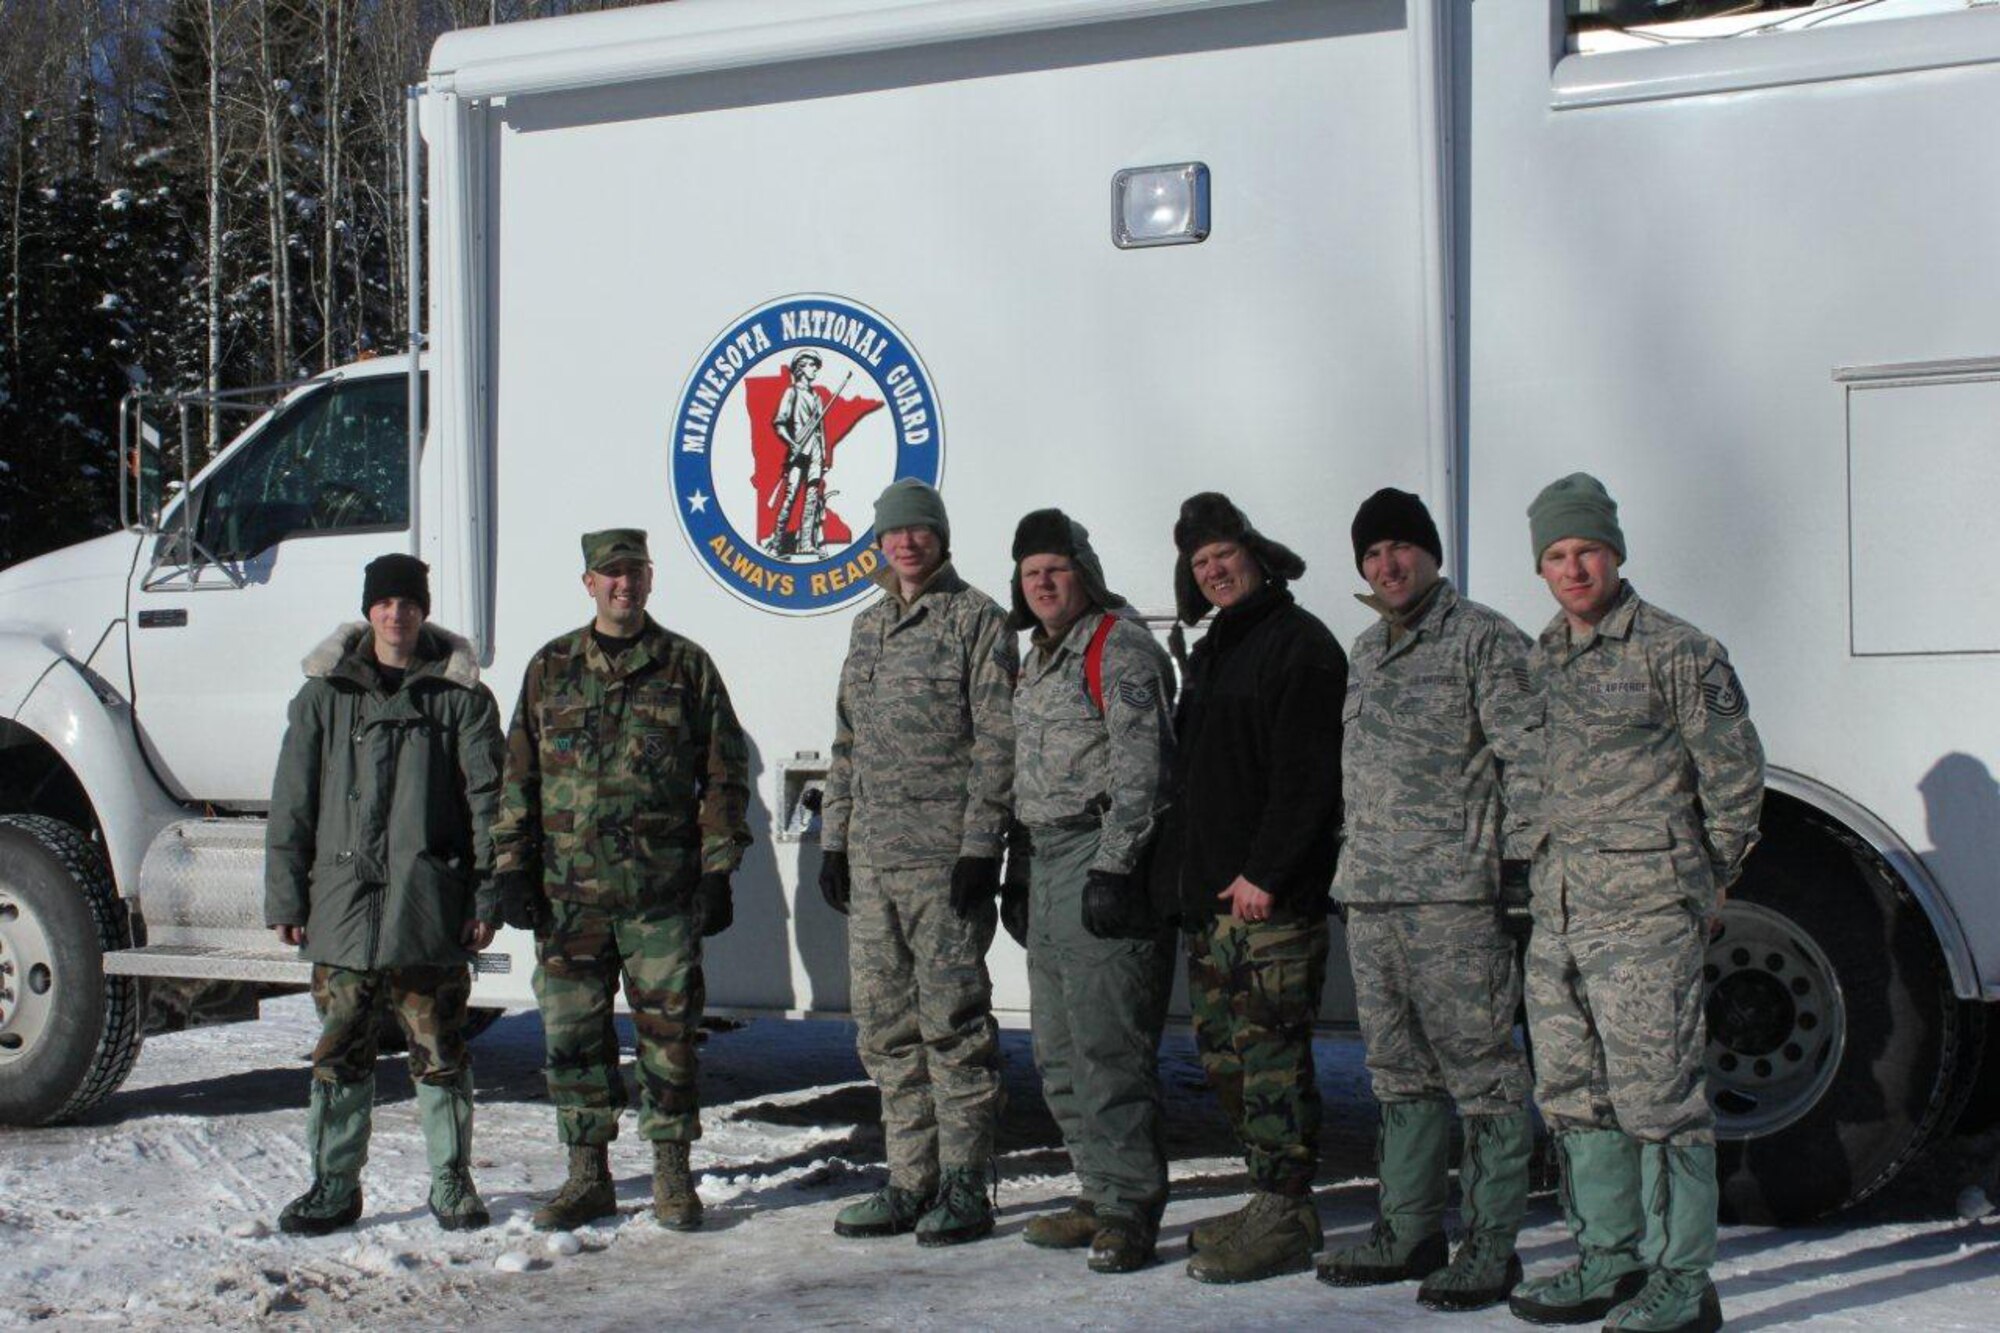 Members of the 148th Fighter Wing, Communication Flight, Deployable Interoperable Communications Element (DICE) take time to pose for a group picture.  The DICE team was deployed to the Grand Marais, Minn. area in support of the John Beargrease Sled Dog Marathon.  U.S. Air Force photo by MSgt Richard Kaufman.  (Released)

